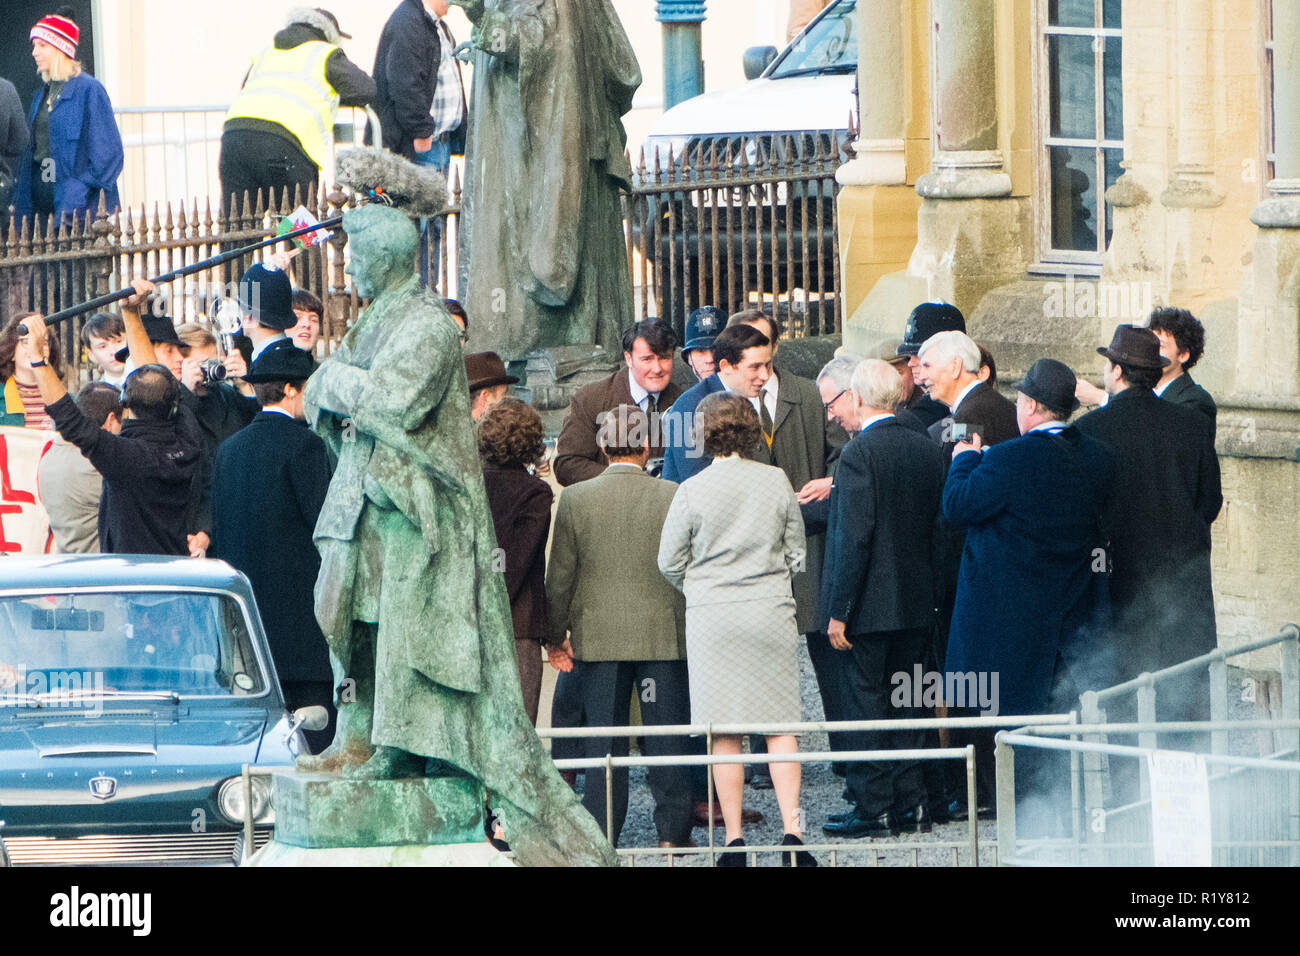 Aberystwyth, Wales, UK, 15th November 2018. Cast and crew on set of the award winning series ‘The Crown’ , filming the scene of the arrival of Prince Charles at Aberystwyth university in 1969 on the eve of his investiture as Prince of Wales later that year in Caernarfon Castle.  Actor Josh O’Connor, playing the part of the Prince in series three and four, is best known for his portrayal of  Johnny Saxby in the film God’s Own Country, for which he won a British Independent Film Award for Best Actor. Credit: Keith Morris/Alamy Live News Stock Photo